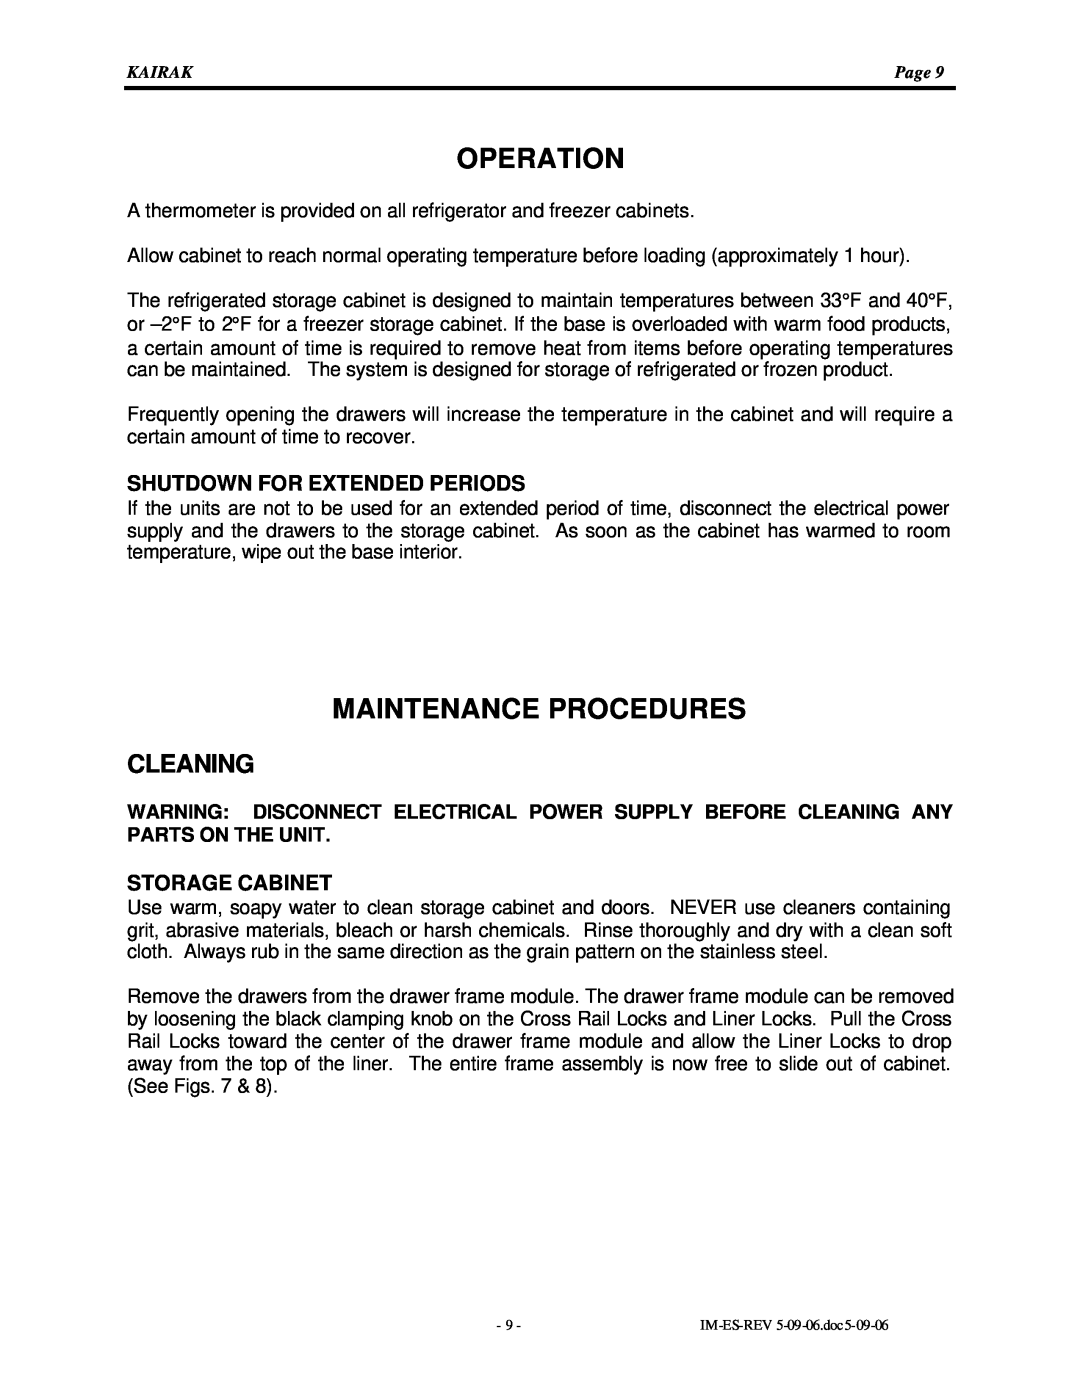 Kairak KRES instruction manual Operation, Maintenance Procedures, Shutdown For Extended Periods, Storage Cabinet, Cleaning 